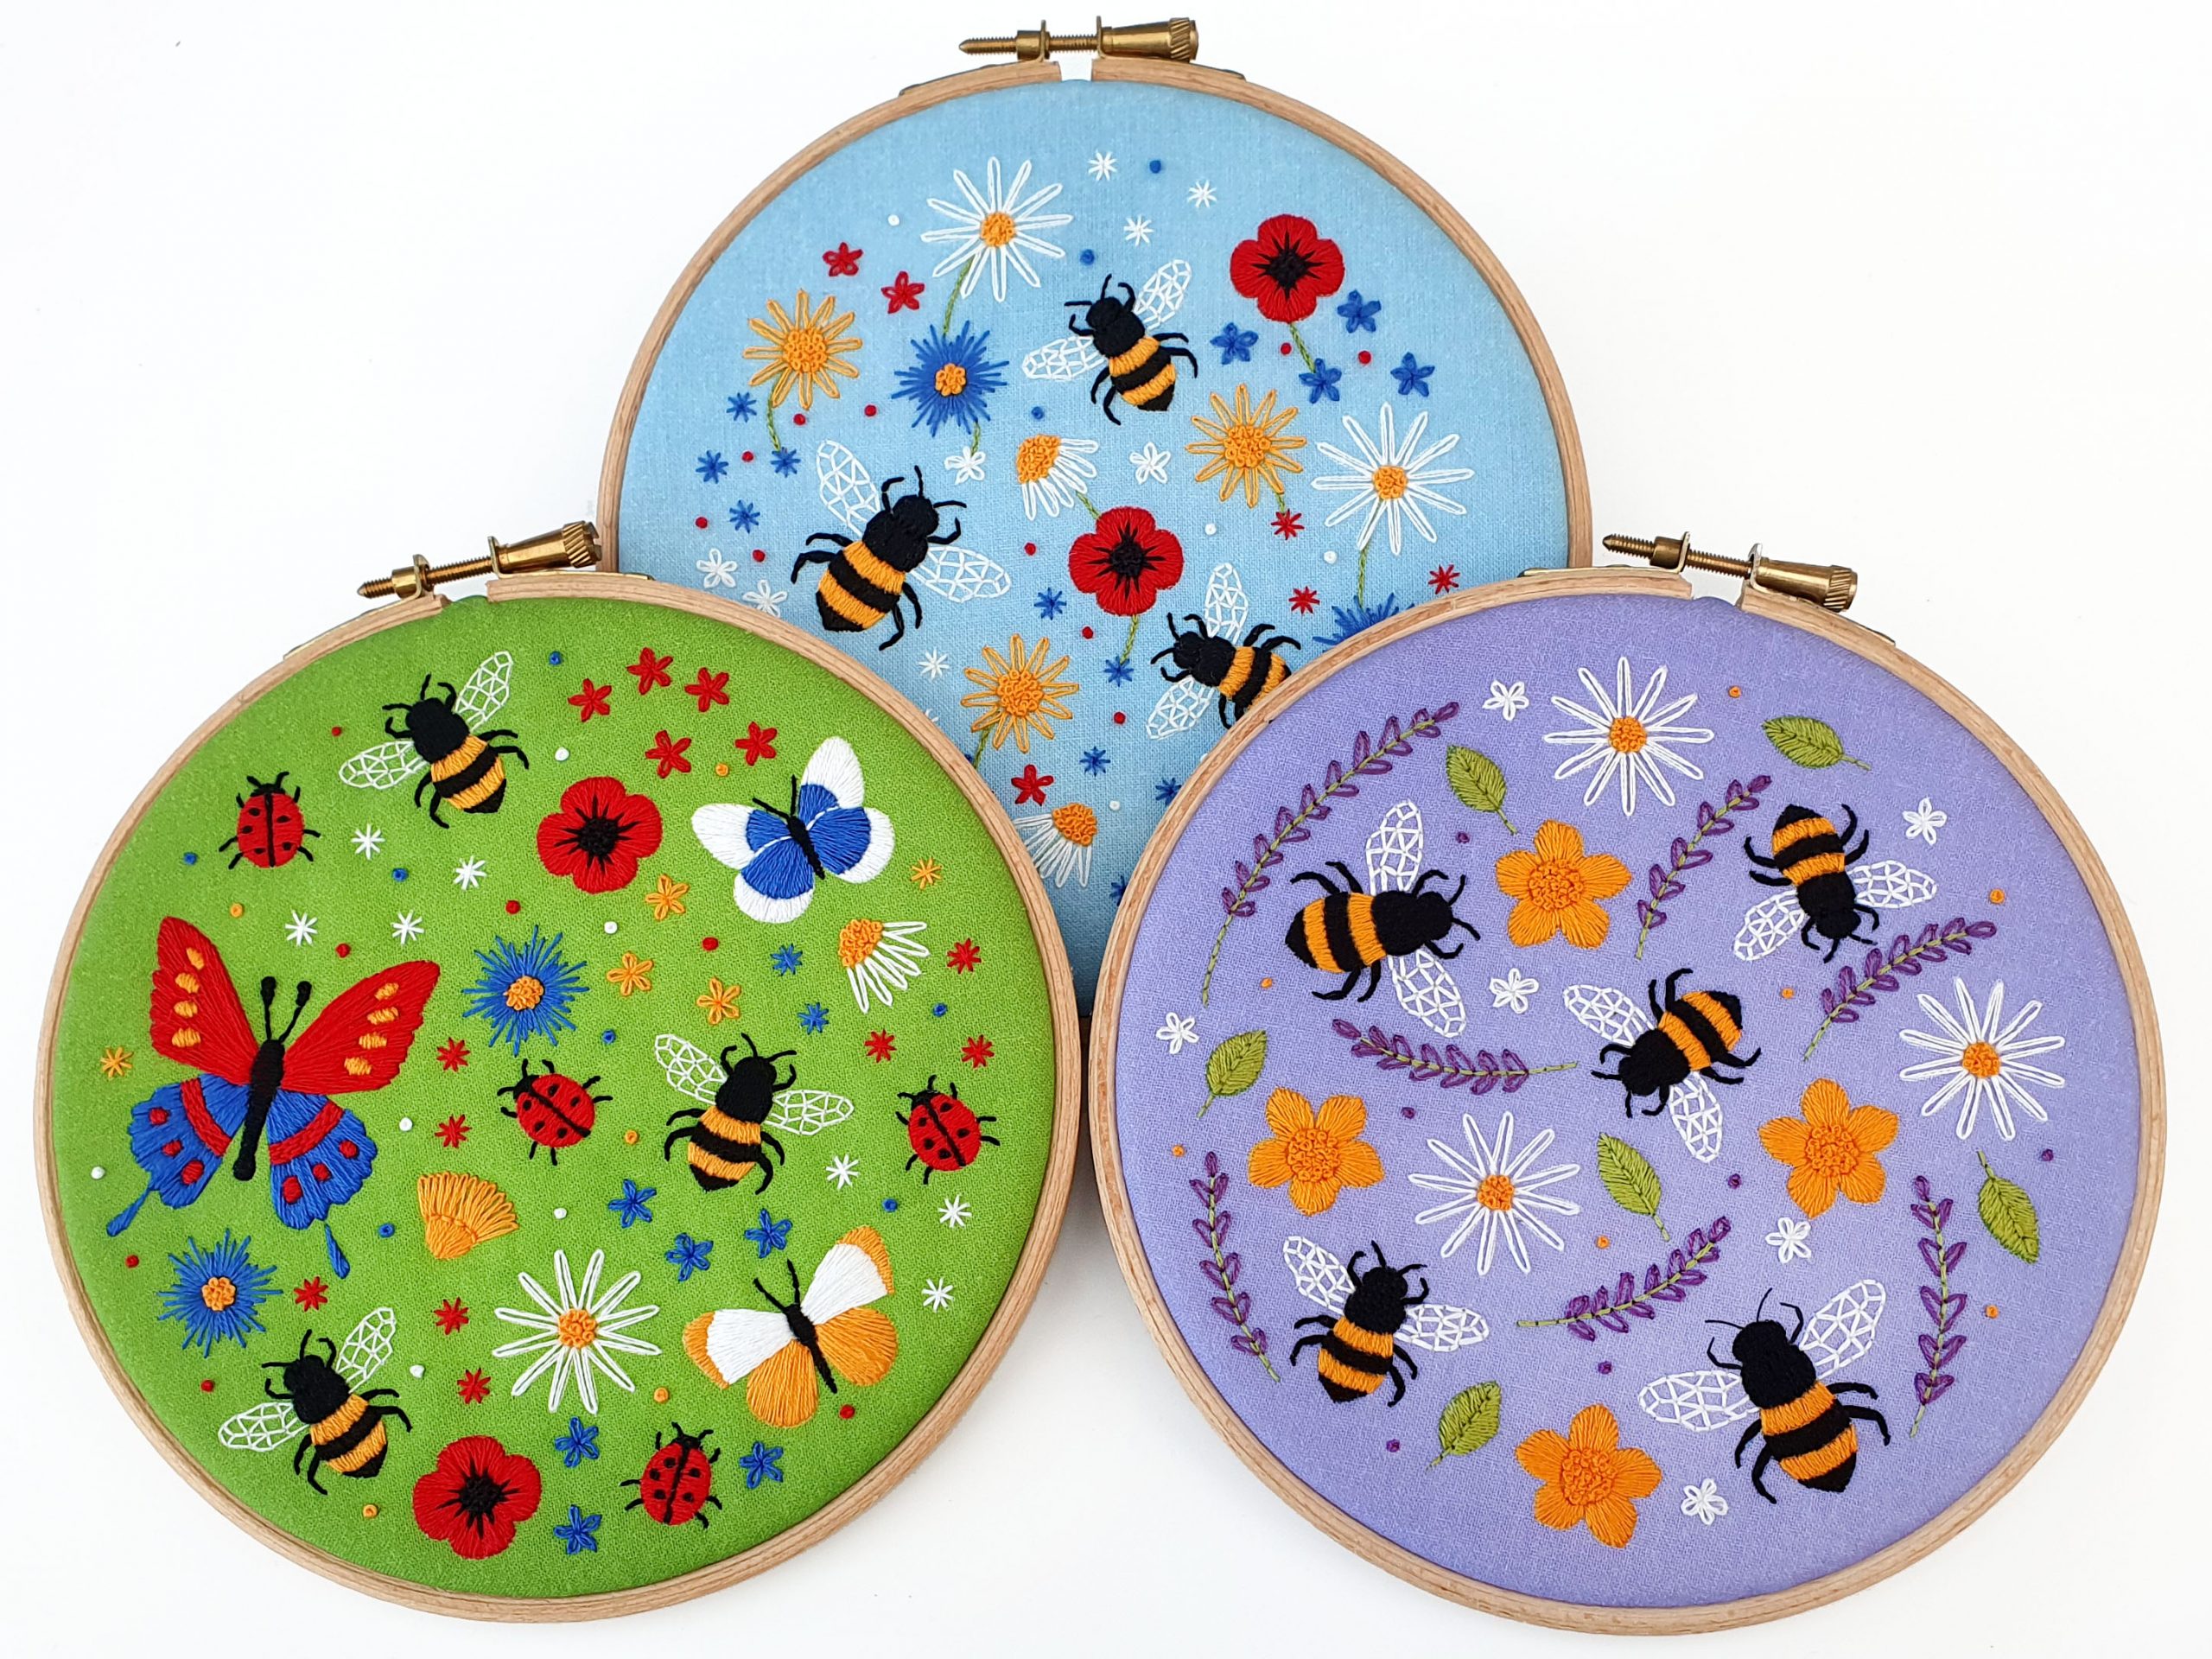 Bees and Wildflowers Bundle Embroidery Kits